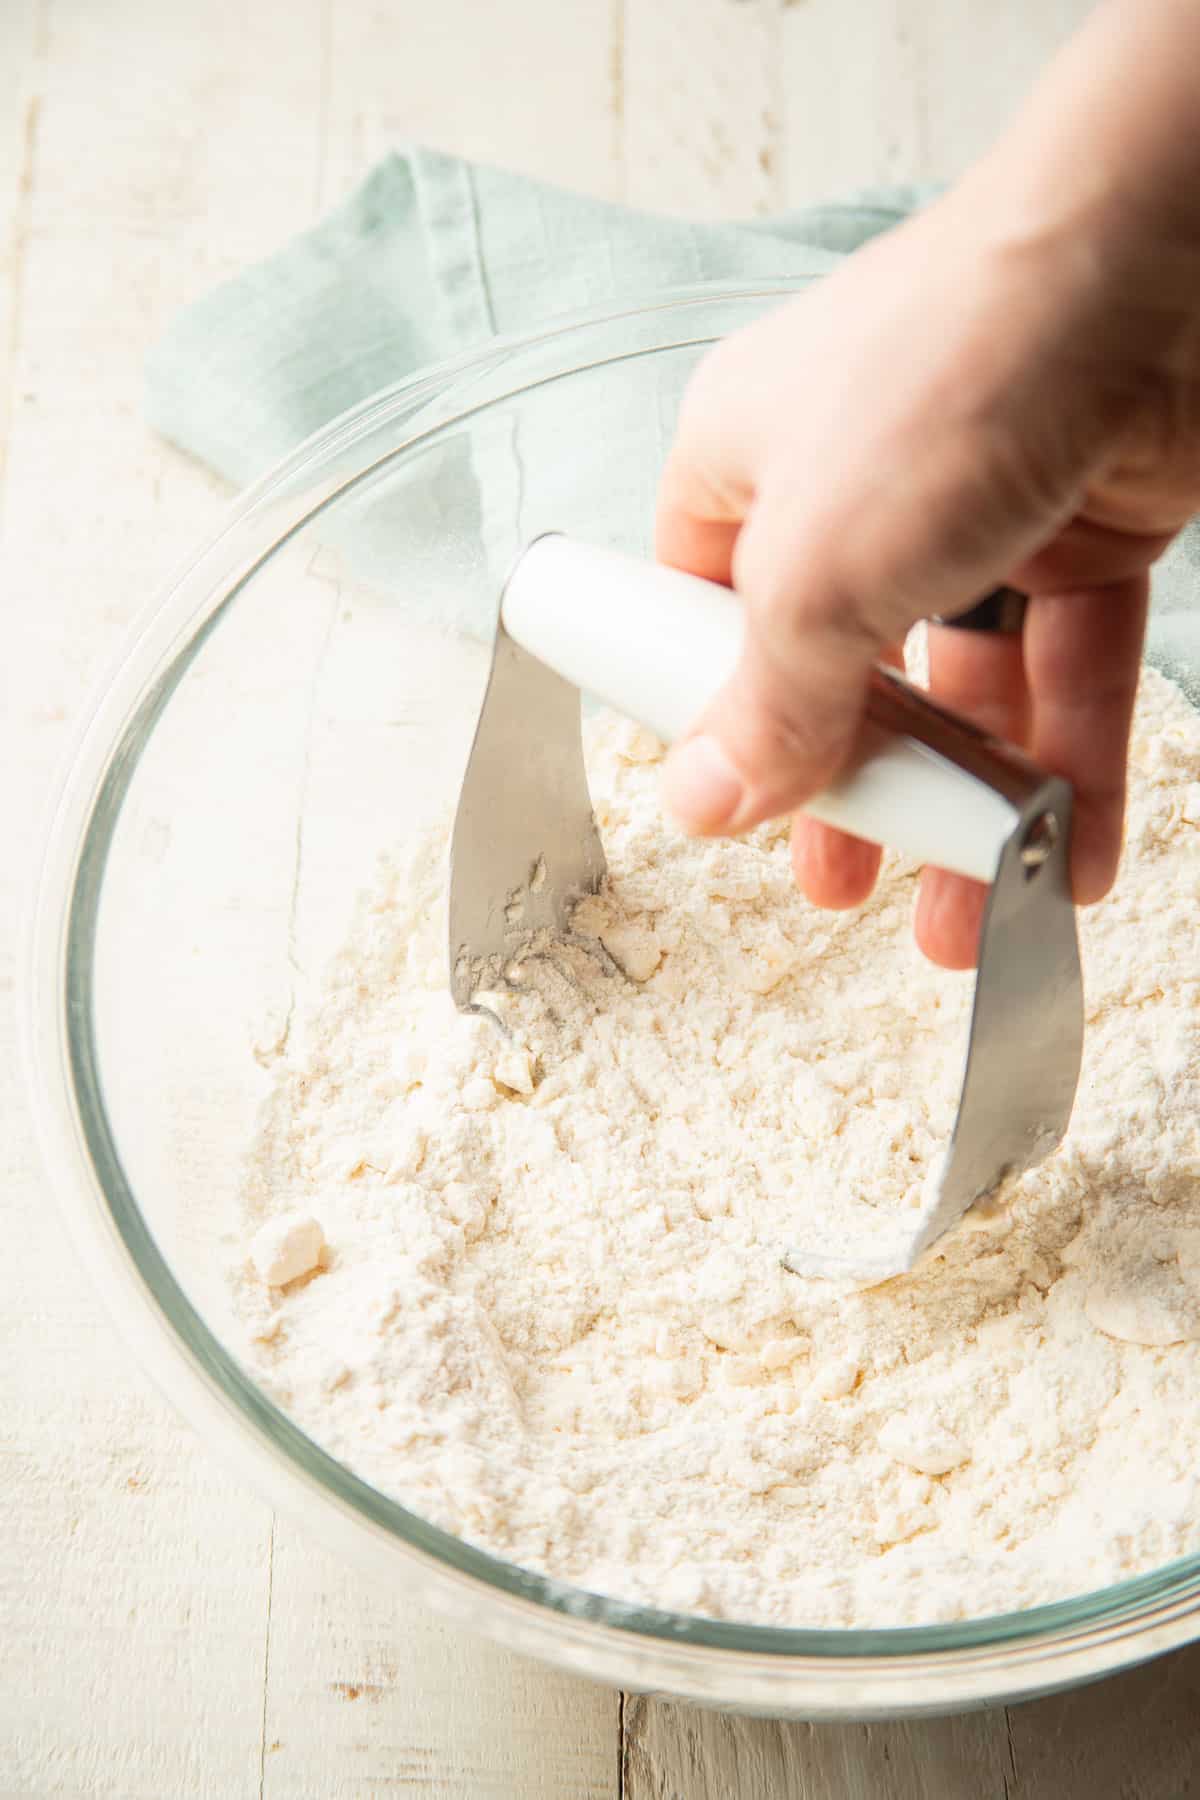 Hand cutting butter into a bowl of dry ingredients for scone dough.